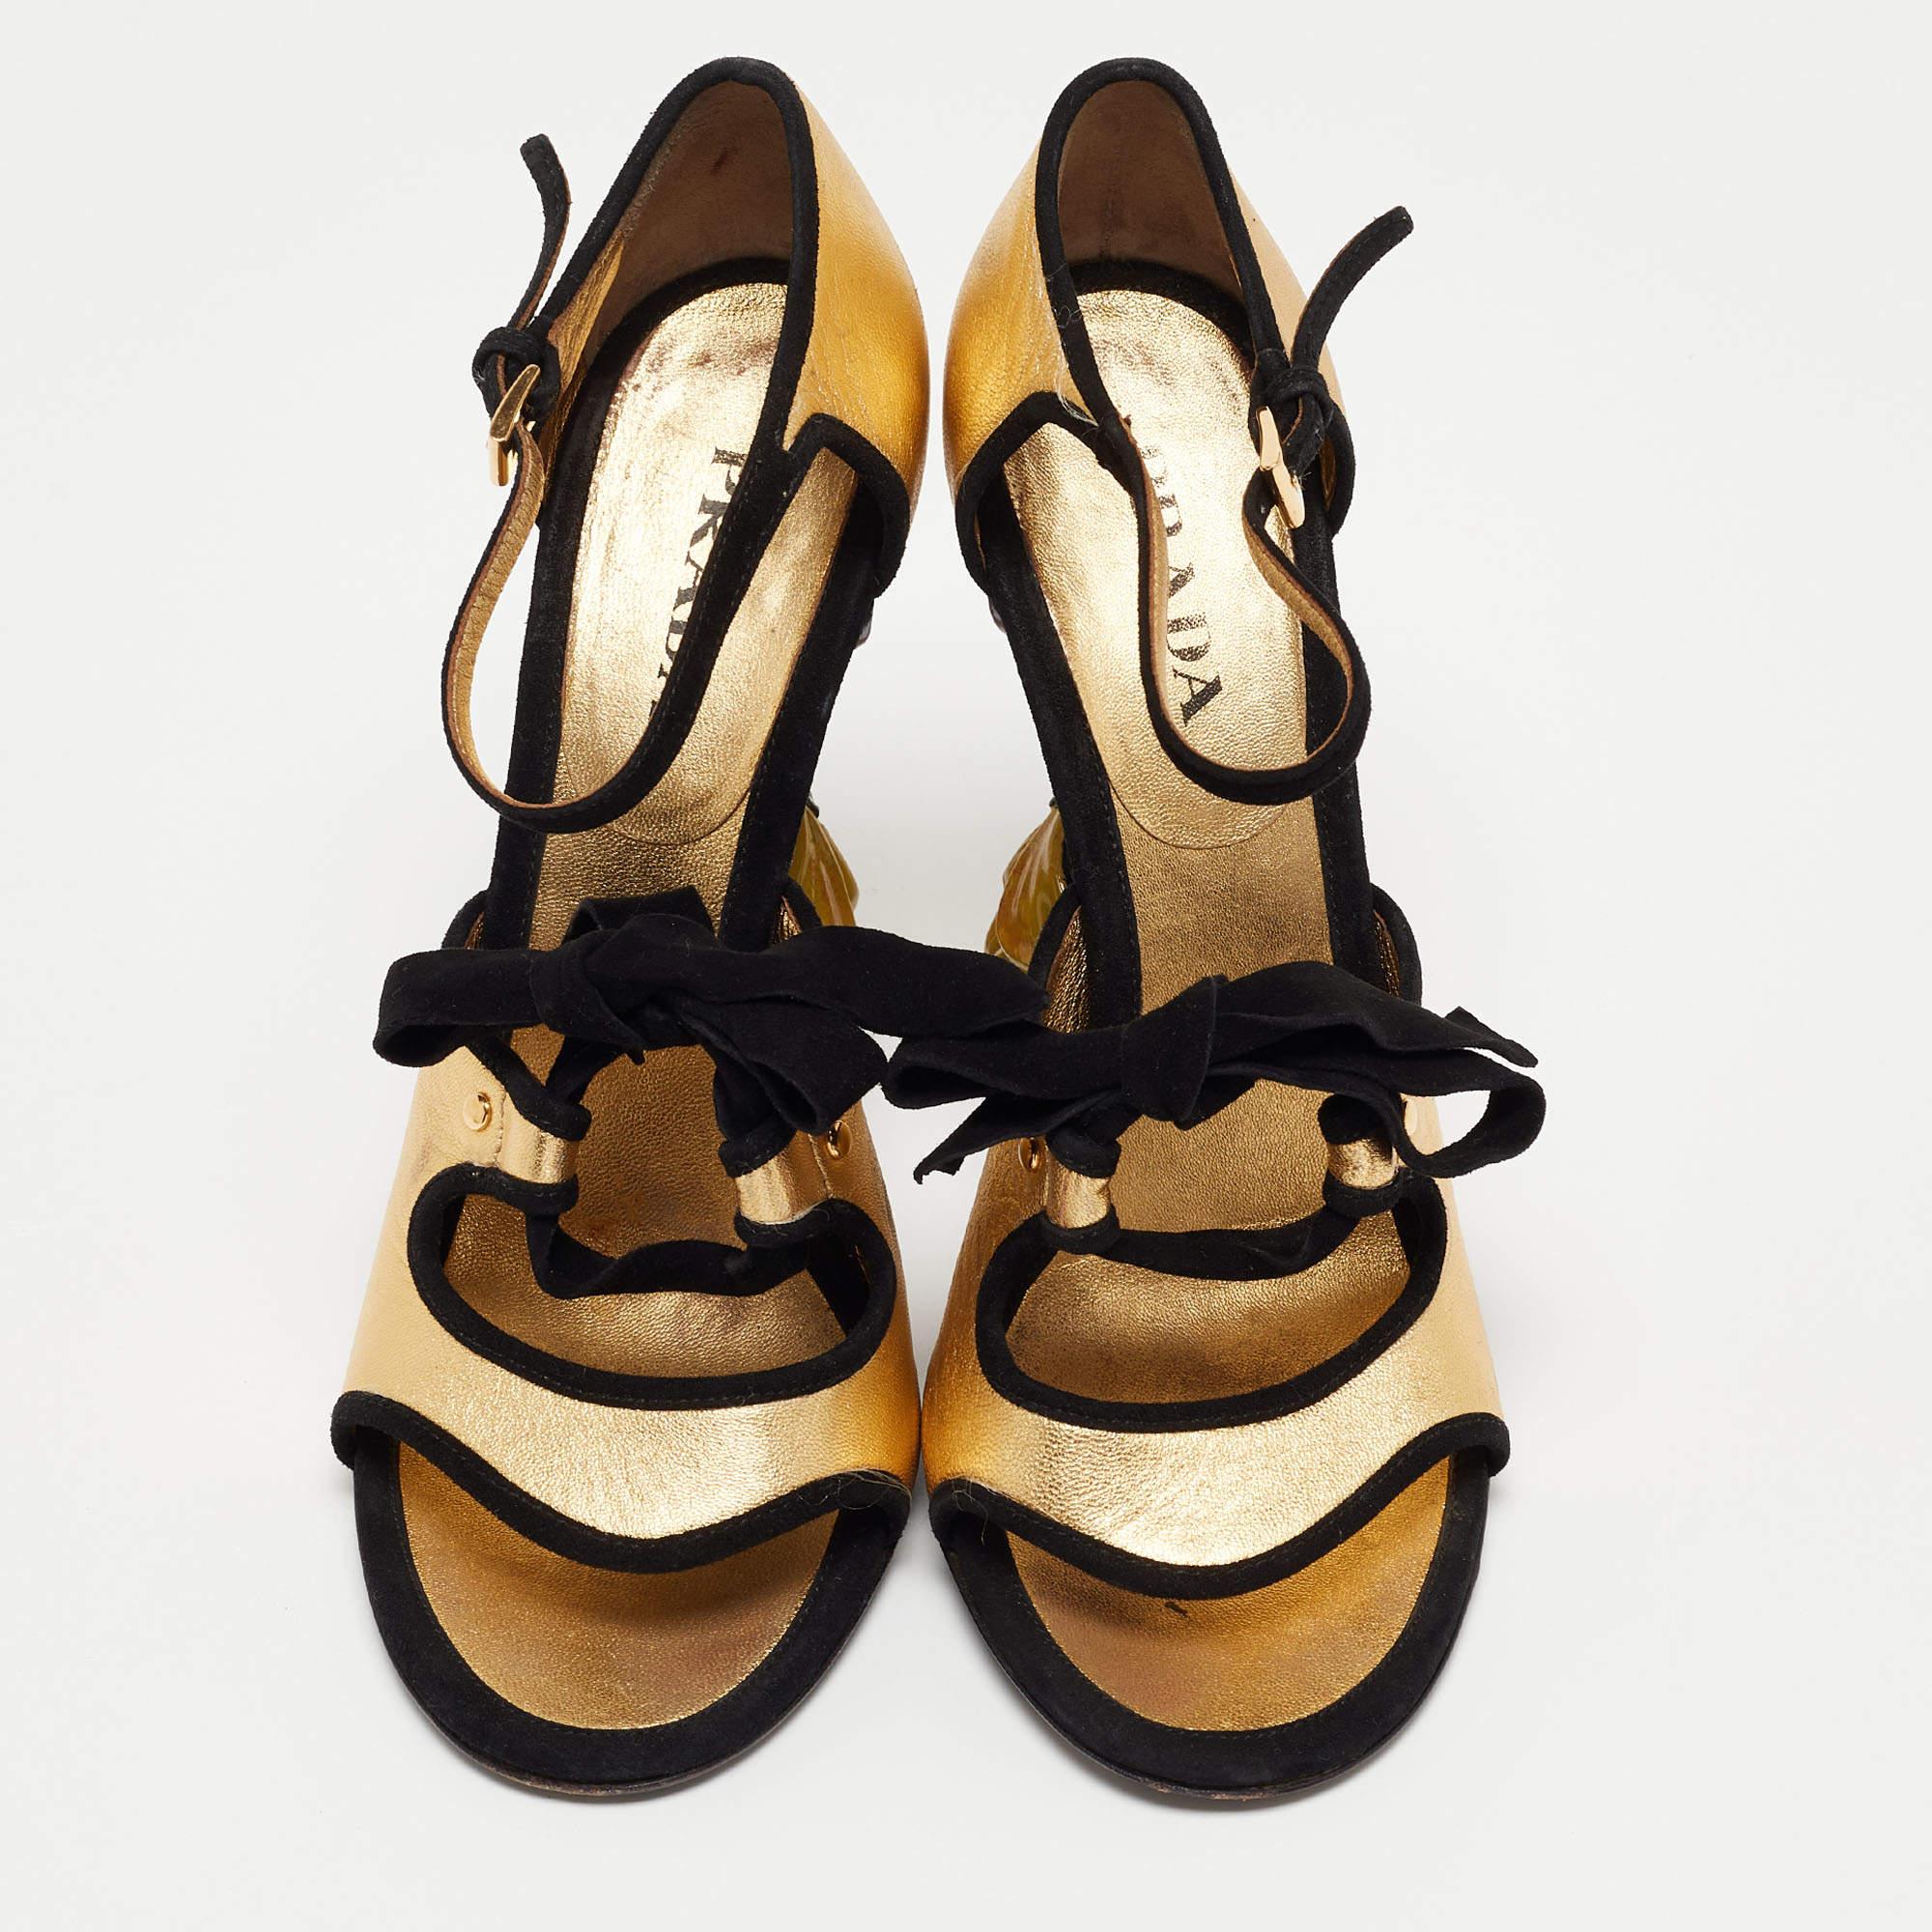 Continuing the delivery of feminine, luxe-chic footwear designs, Prada presents these beauties in gold and black. Constructed using leather and suede, the sanals are lifted on flower heels.

